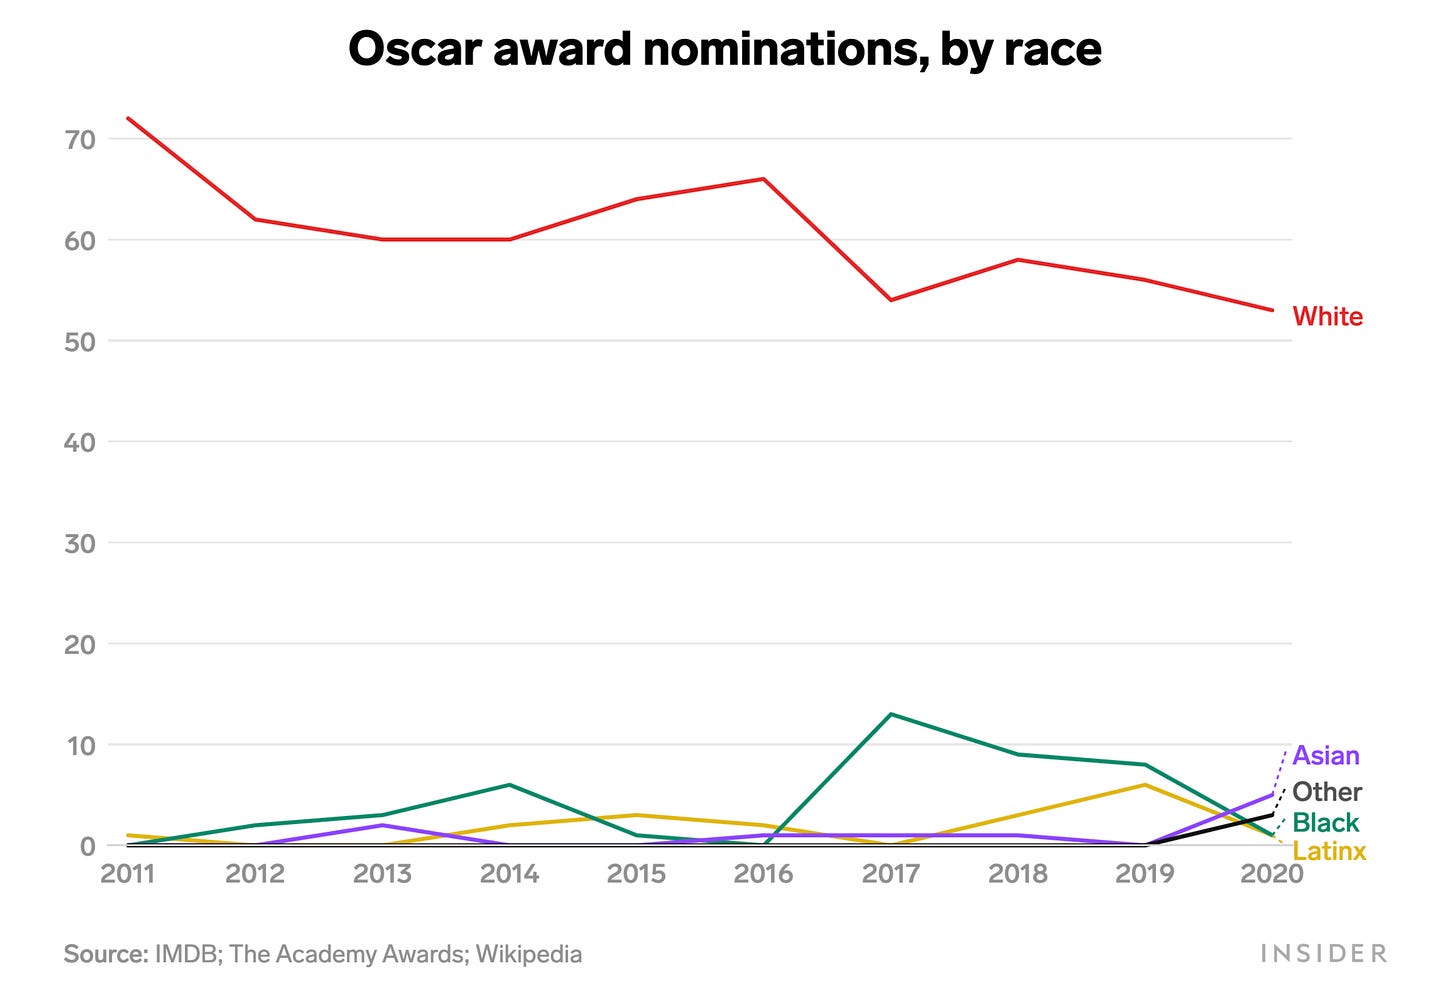 Graph showing Oscar award nominations by race between 2011 and 2020